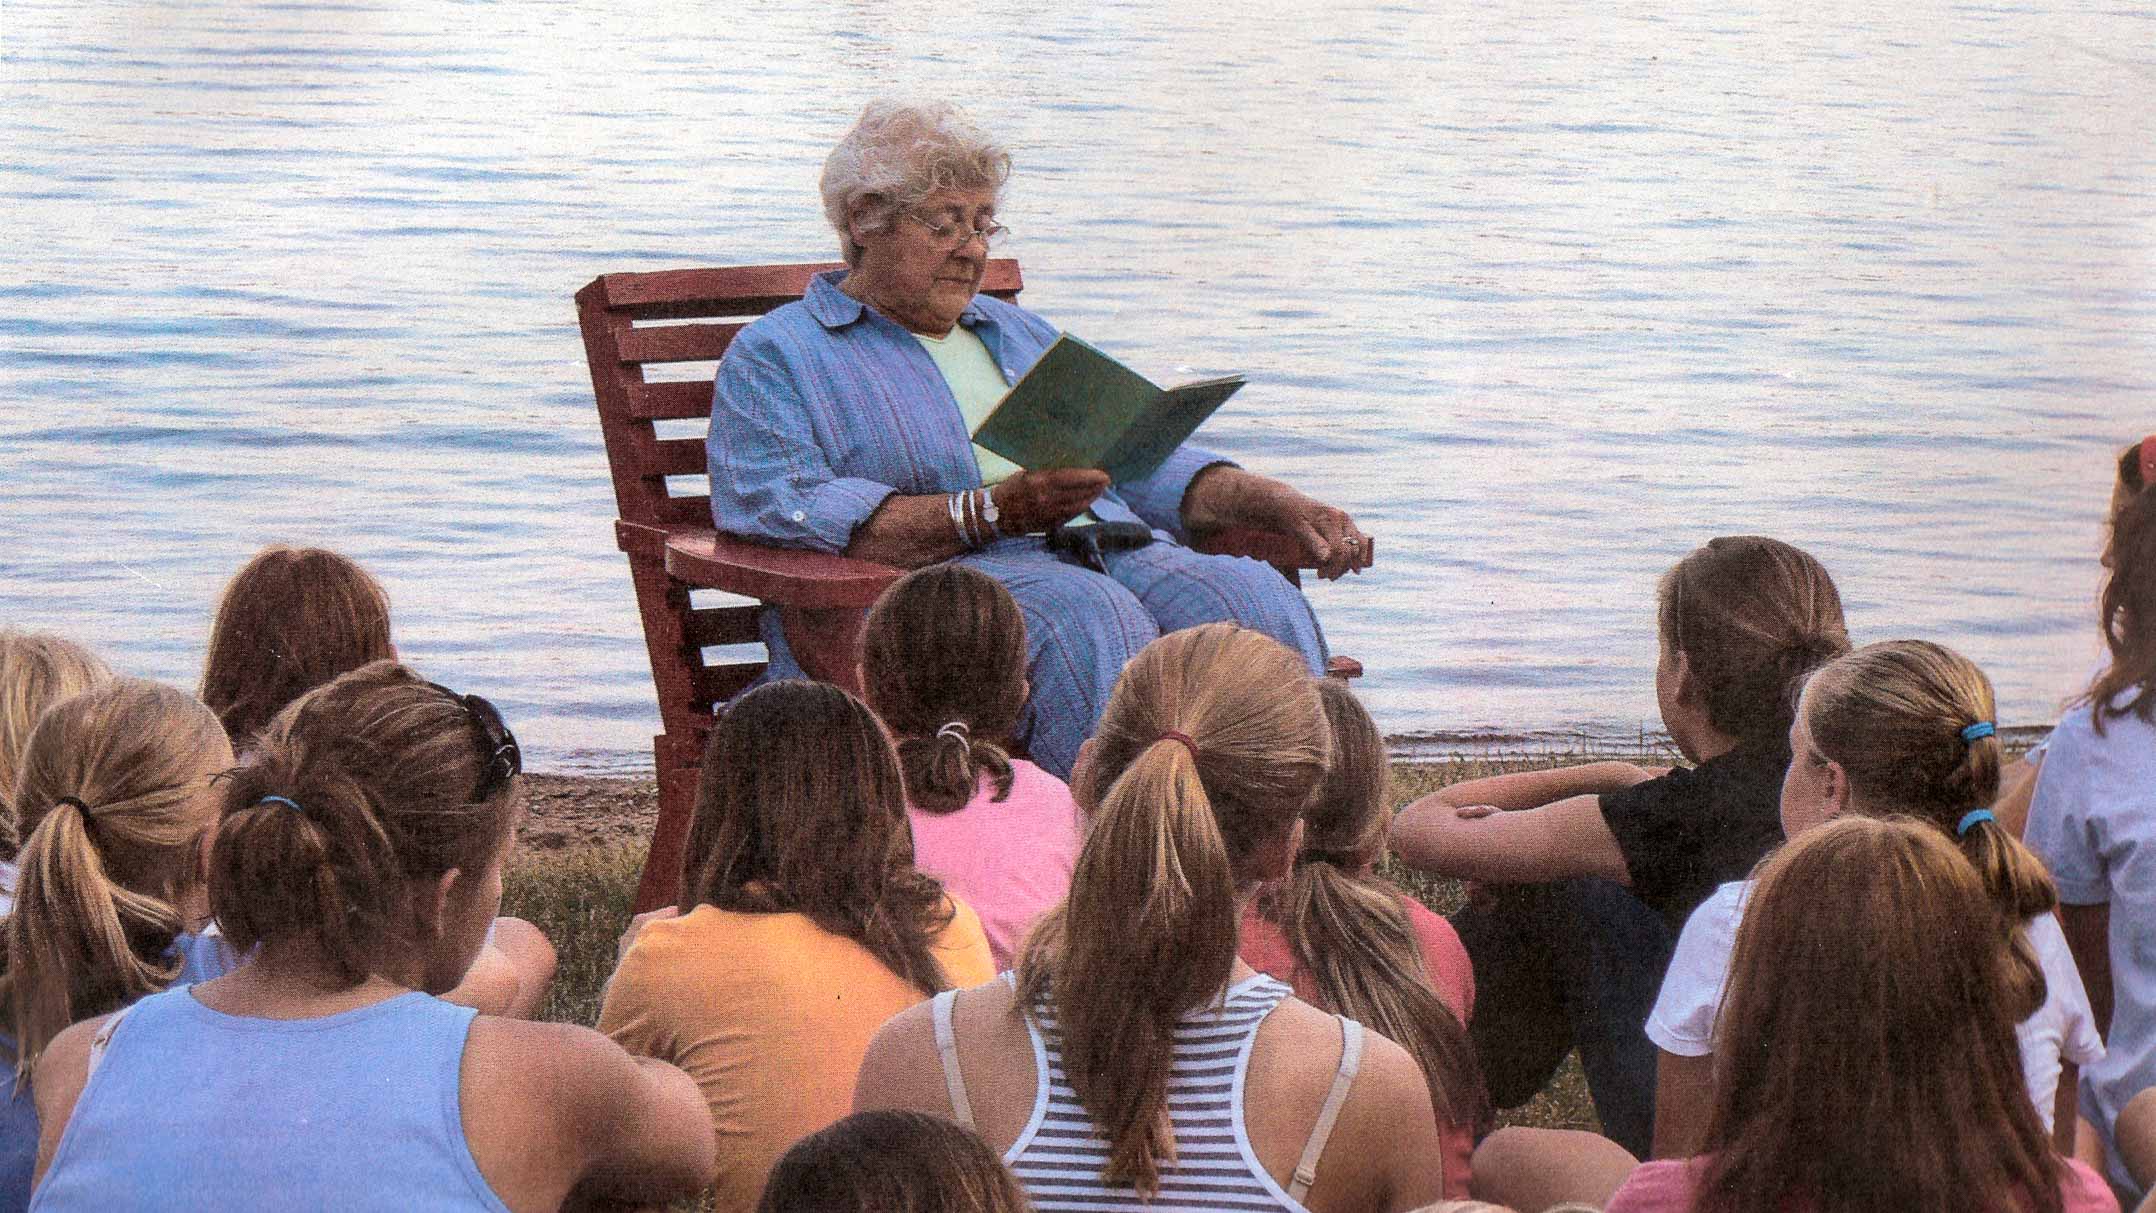 Sunny reads to campers by lakeshore